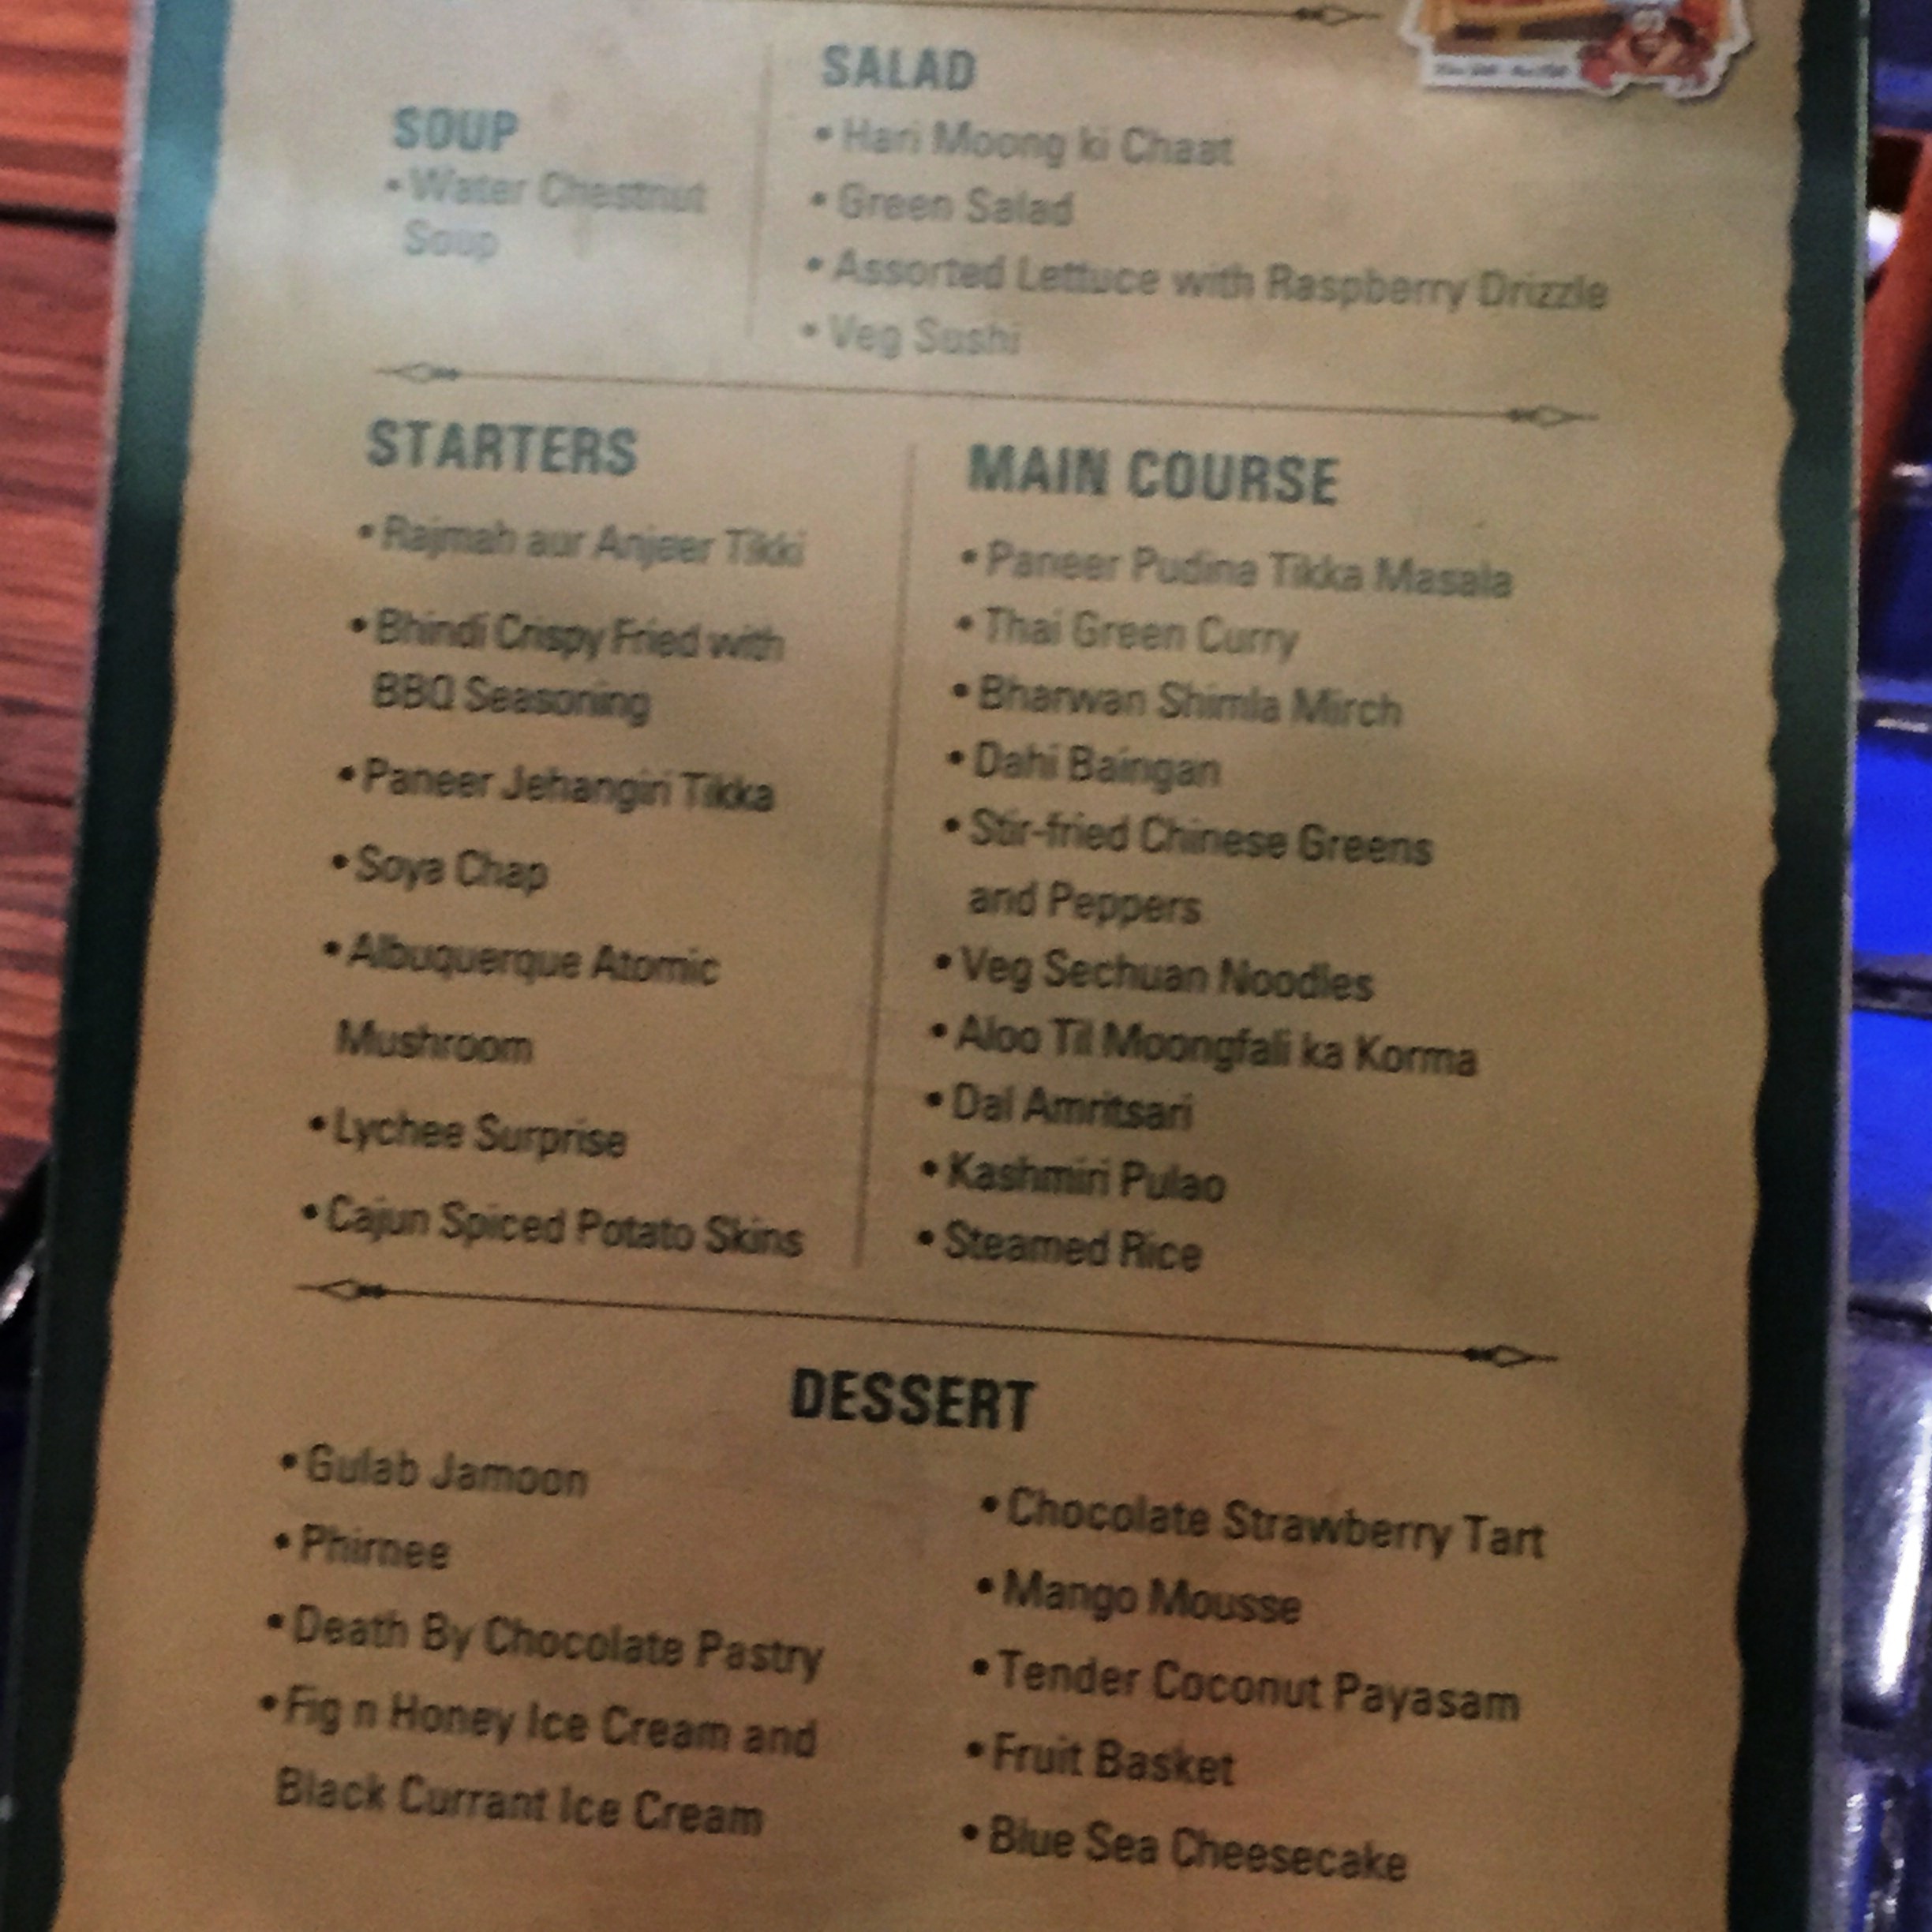 The Extremely Versatile Menu